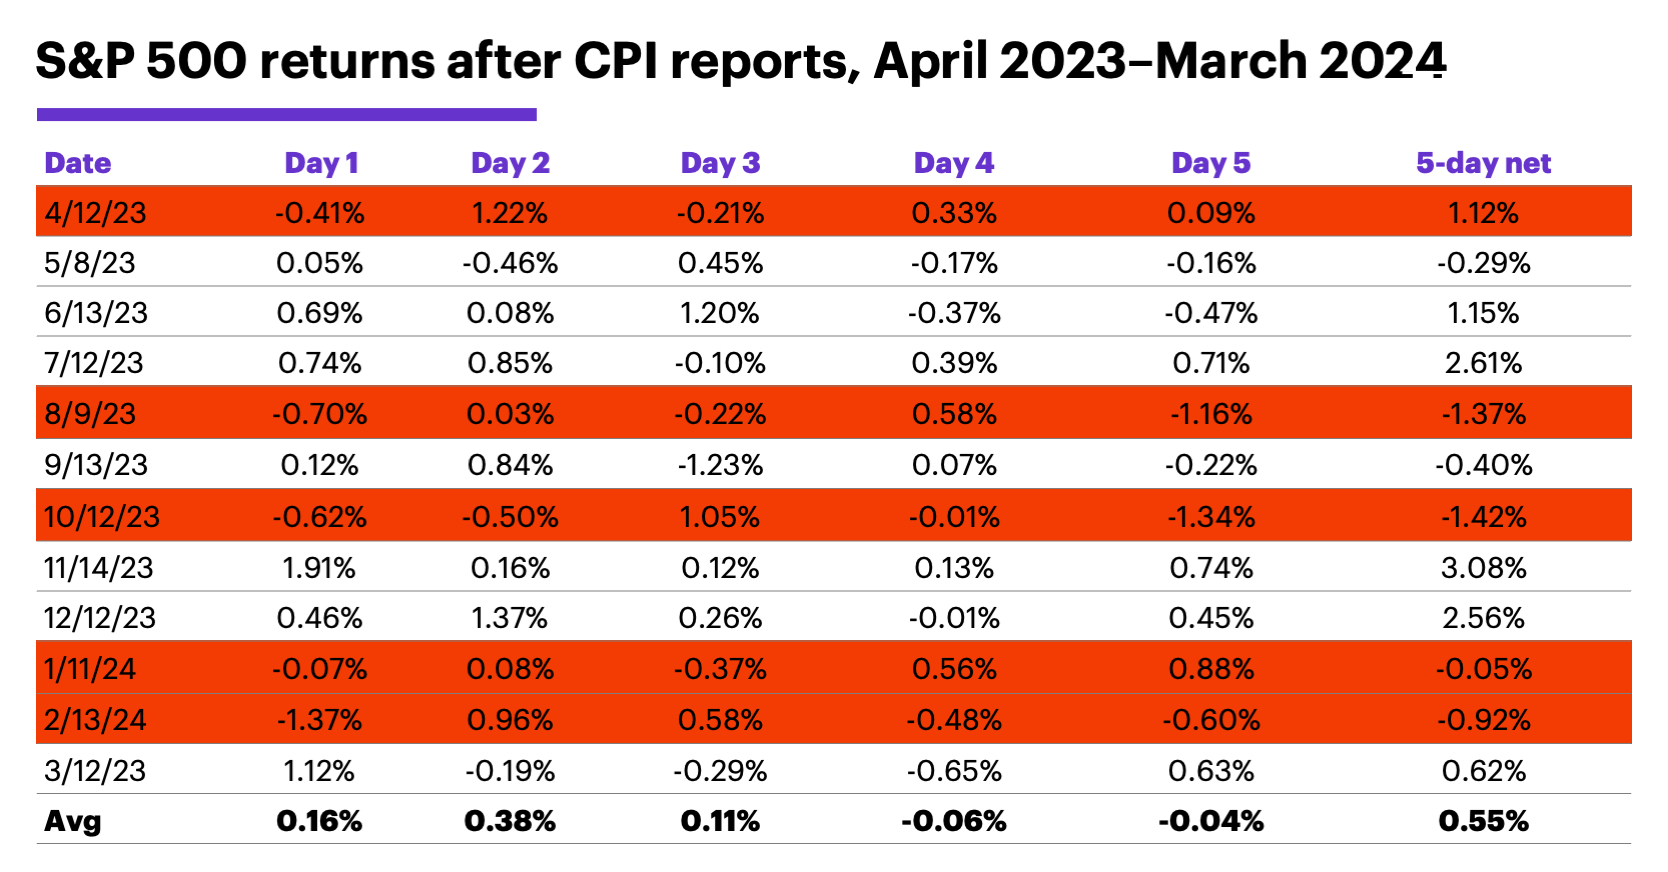 Chart 2: S&P 500 returns after CPI reports, April 2023–March 2024. Mixed results.